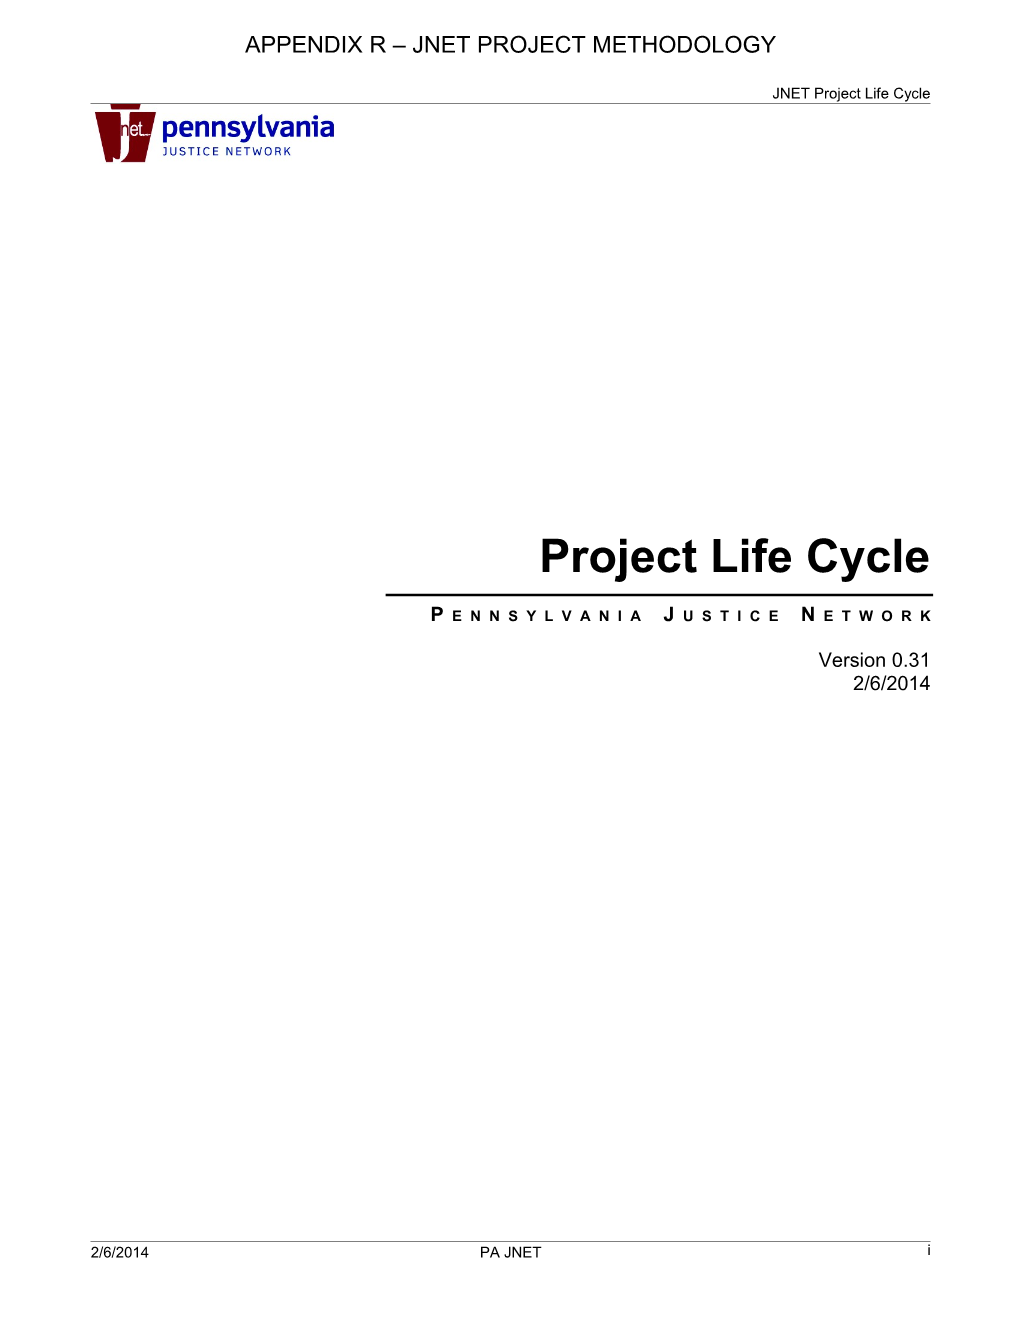 JNET Project Life Cycle